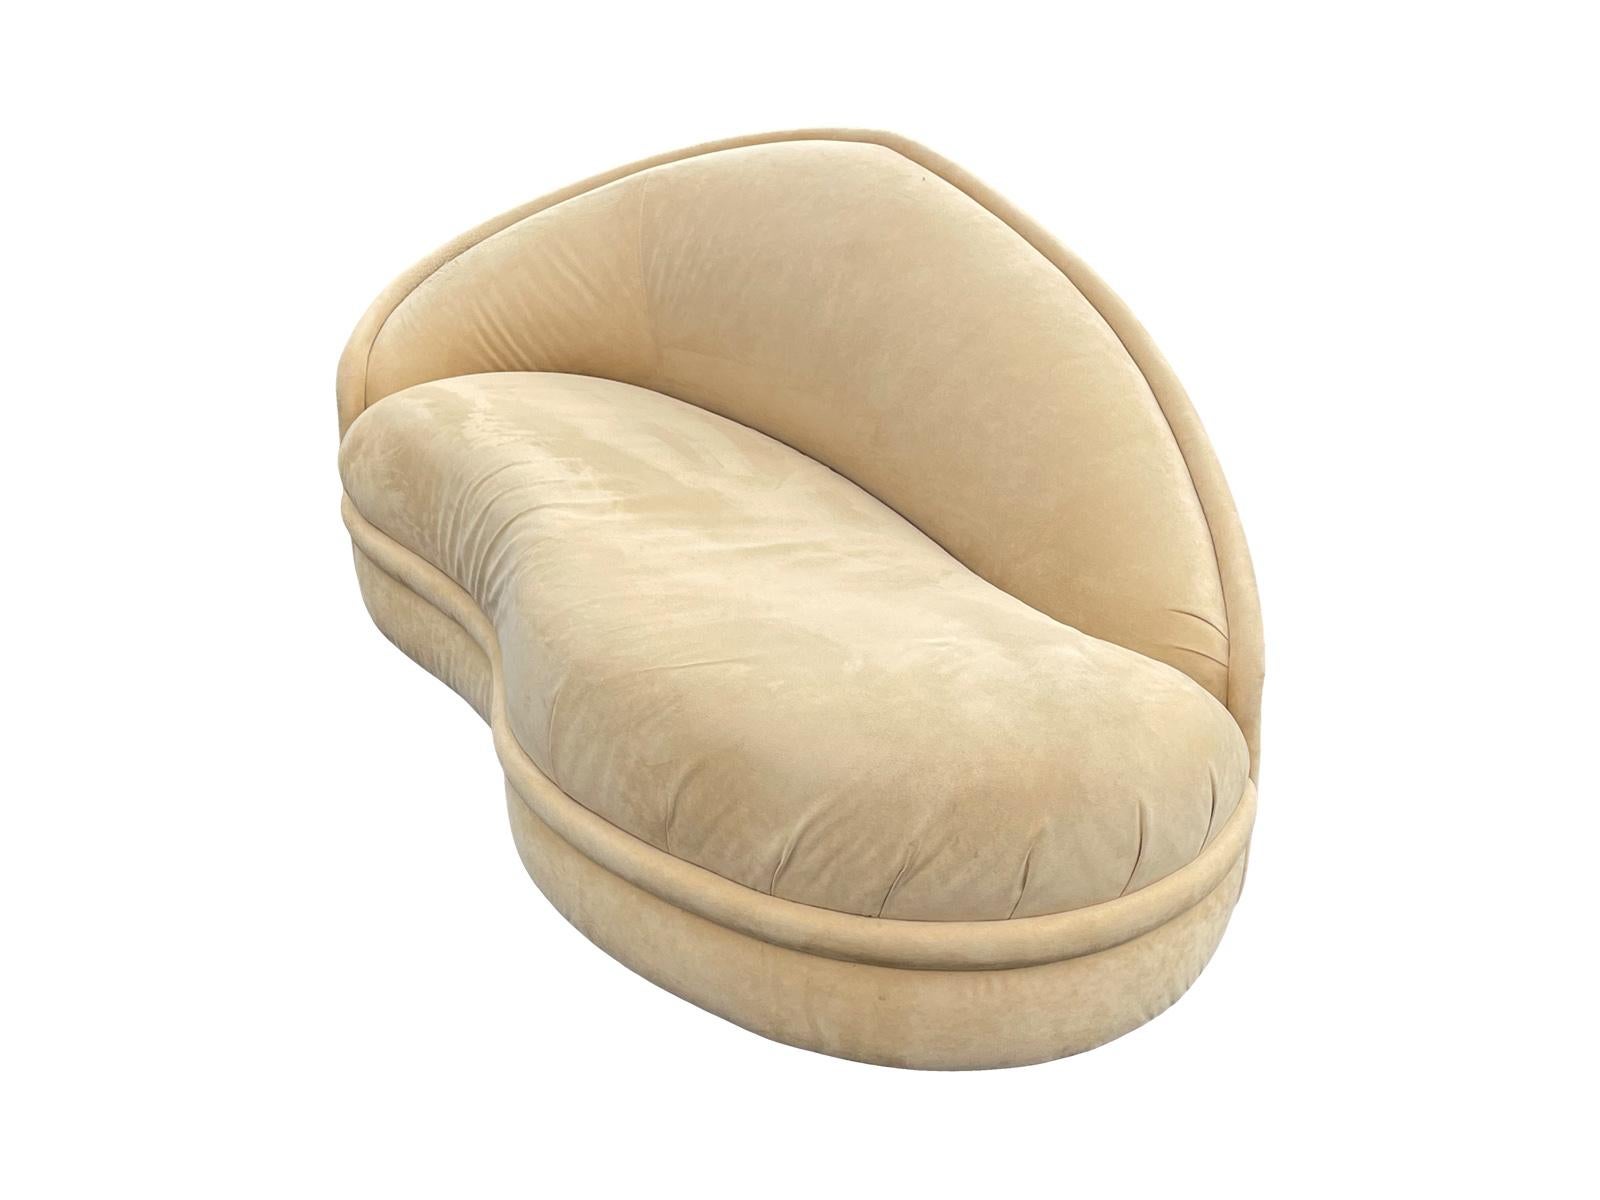 Art Deco Biomorphic Kidney Shaped Mid-Century Modern Chaise Lounge Sofa For Sale